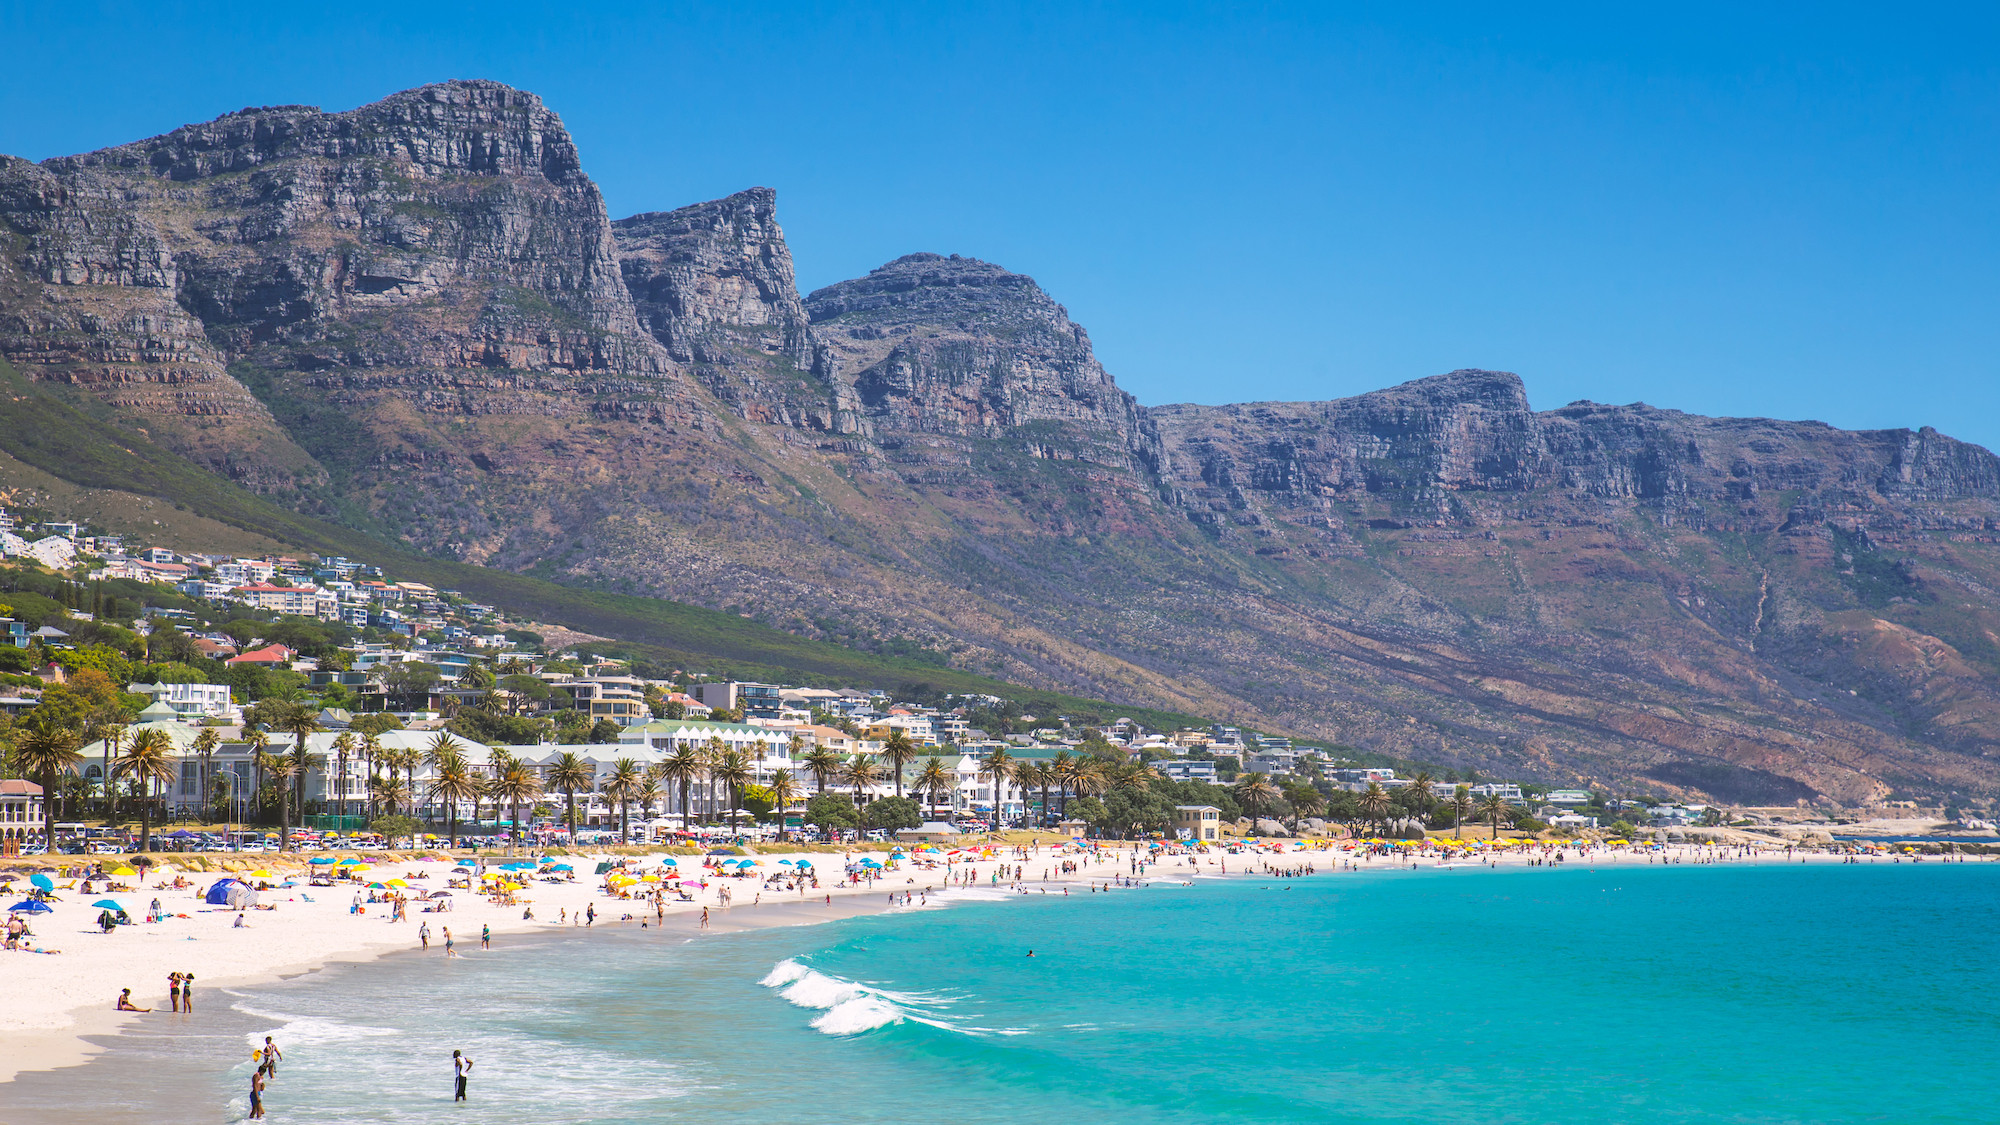 Cape Town Winter Sun Travel Guide: the best places to eat and stay